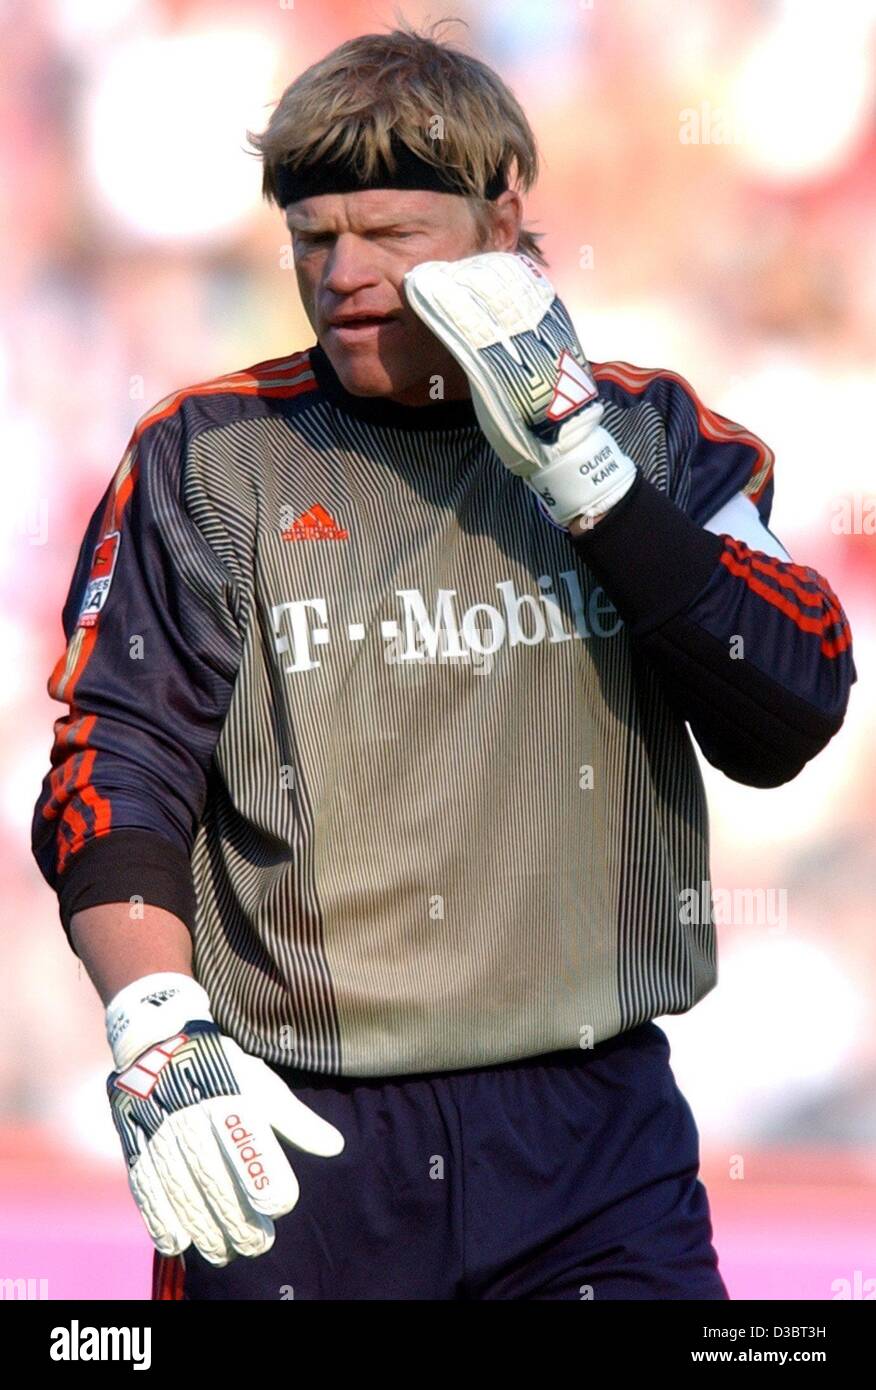 dpa) - Bayern's goalkeeper Oliver Kahn, who still suffers from eye  problems, gestures during the Bundesliga game opposing FC Bayern Munich and  Bayer 04 Leverkusen in Munich, 20 September 2003. The game